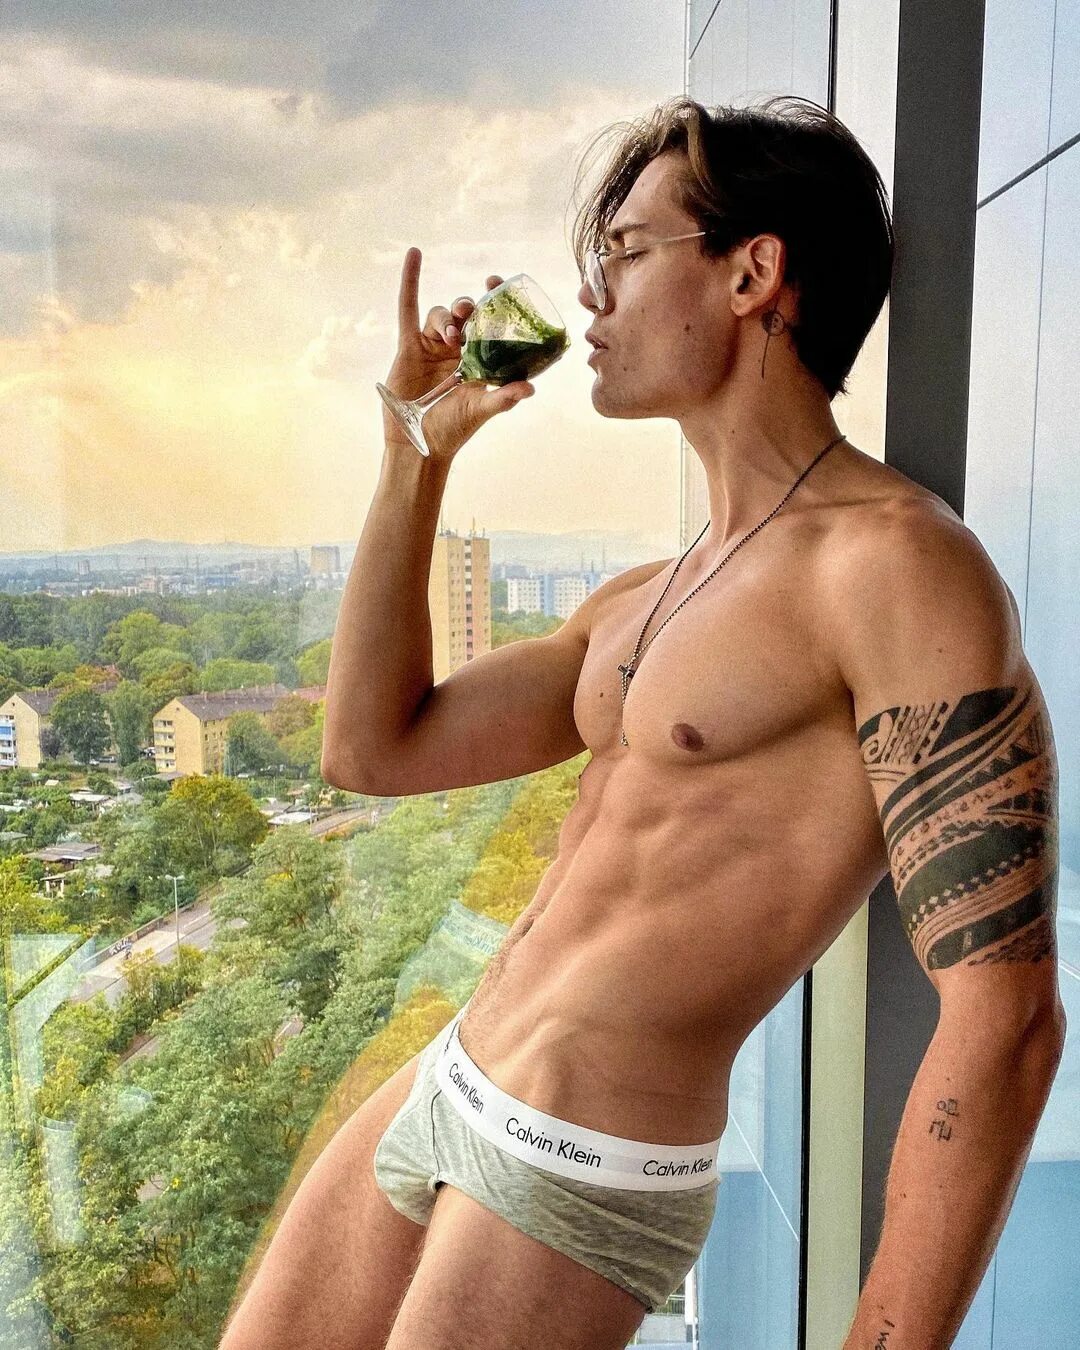 Mario Adrion (@marioadrion) posted on Instagram: "I don’t drink wine.....